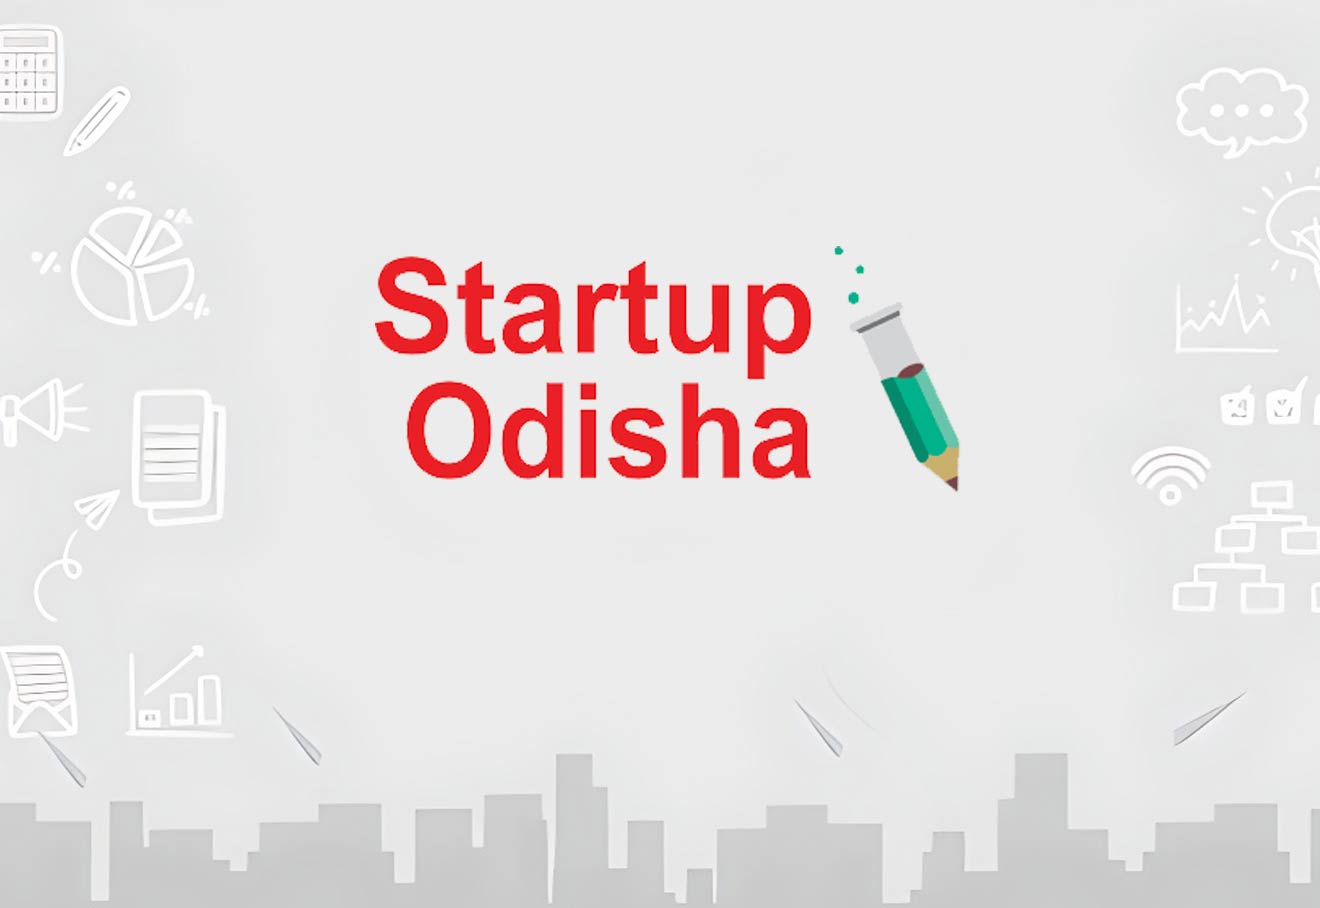 Odisha Govt Approves Rs 1.28 Crore Grant For 10 High-Potential Startups